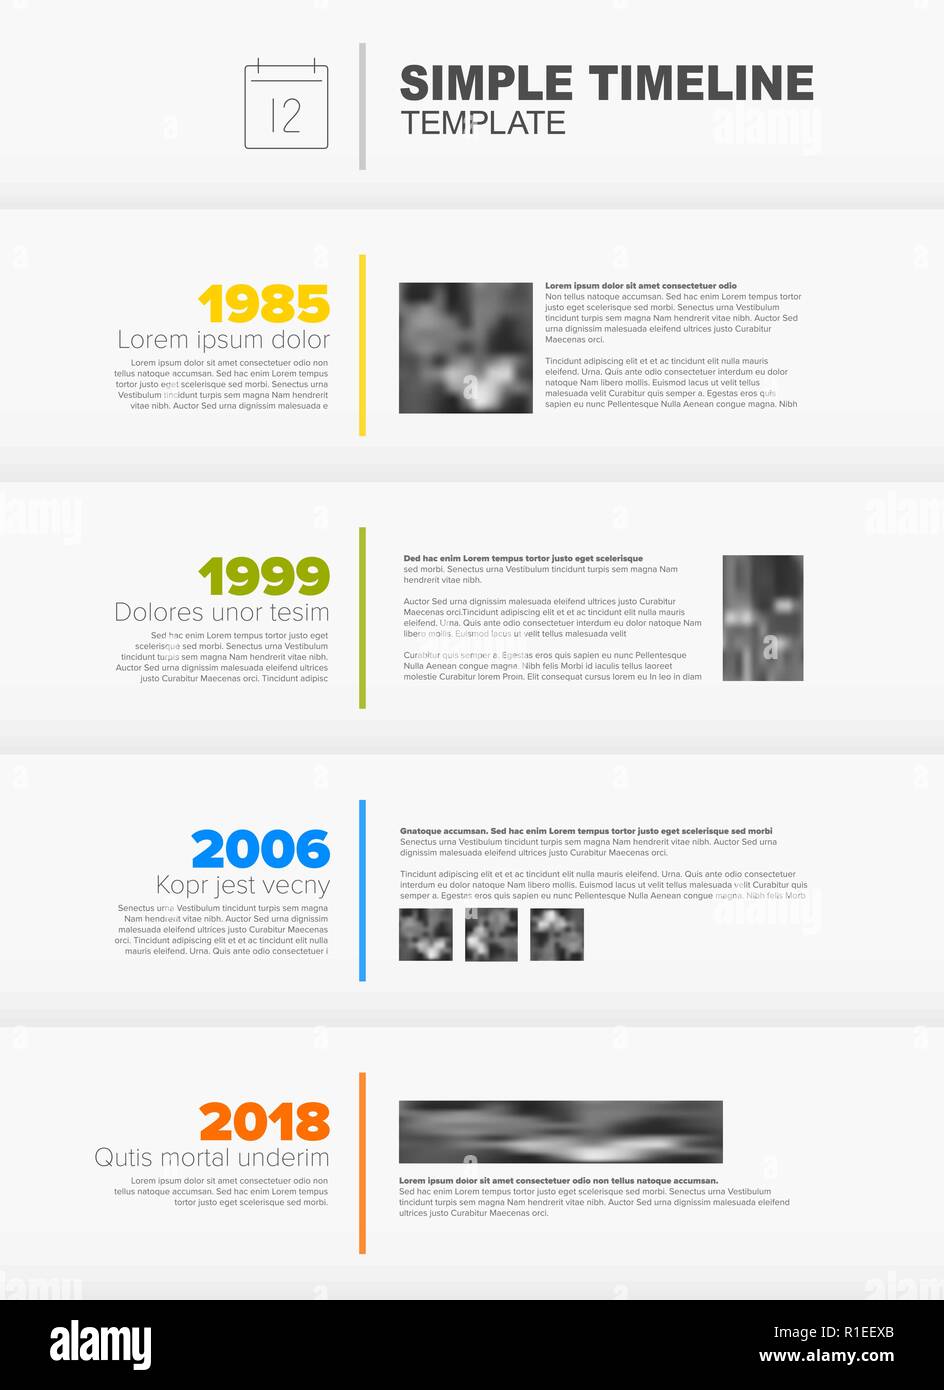 Simple Timeline Template from c8.alamy.com